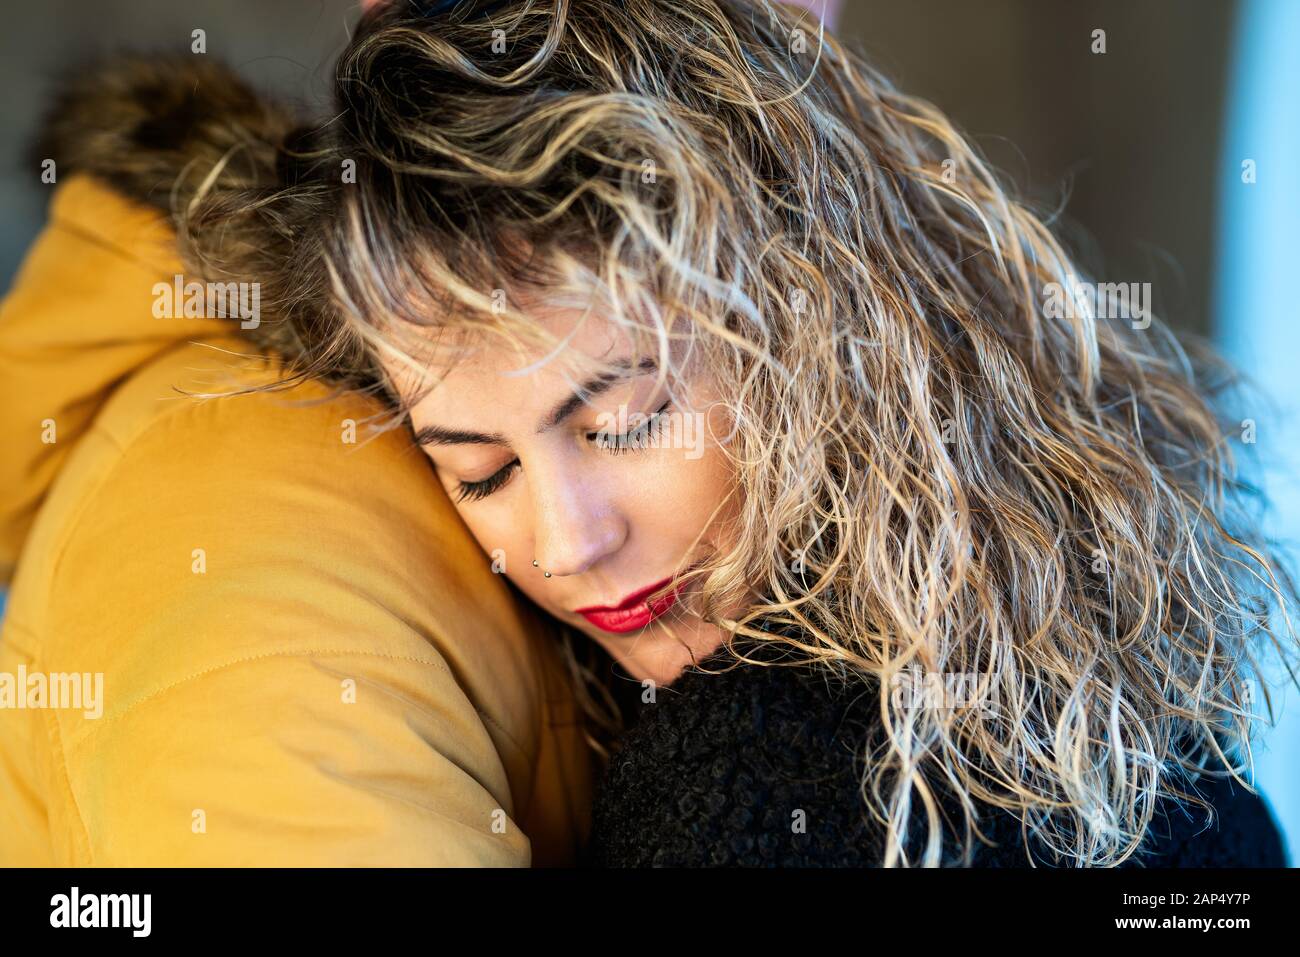 Portrait of a lovely woman with close eyes  hugging her man. Stock Photo